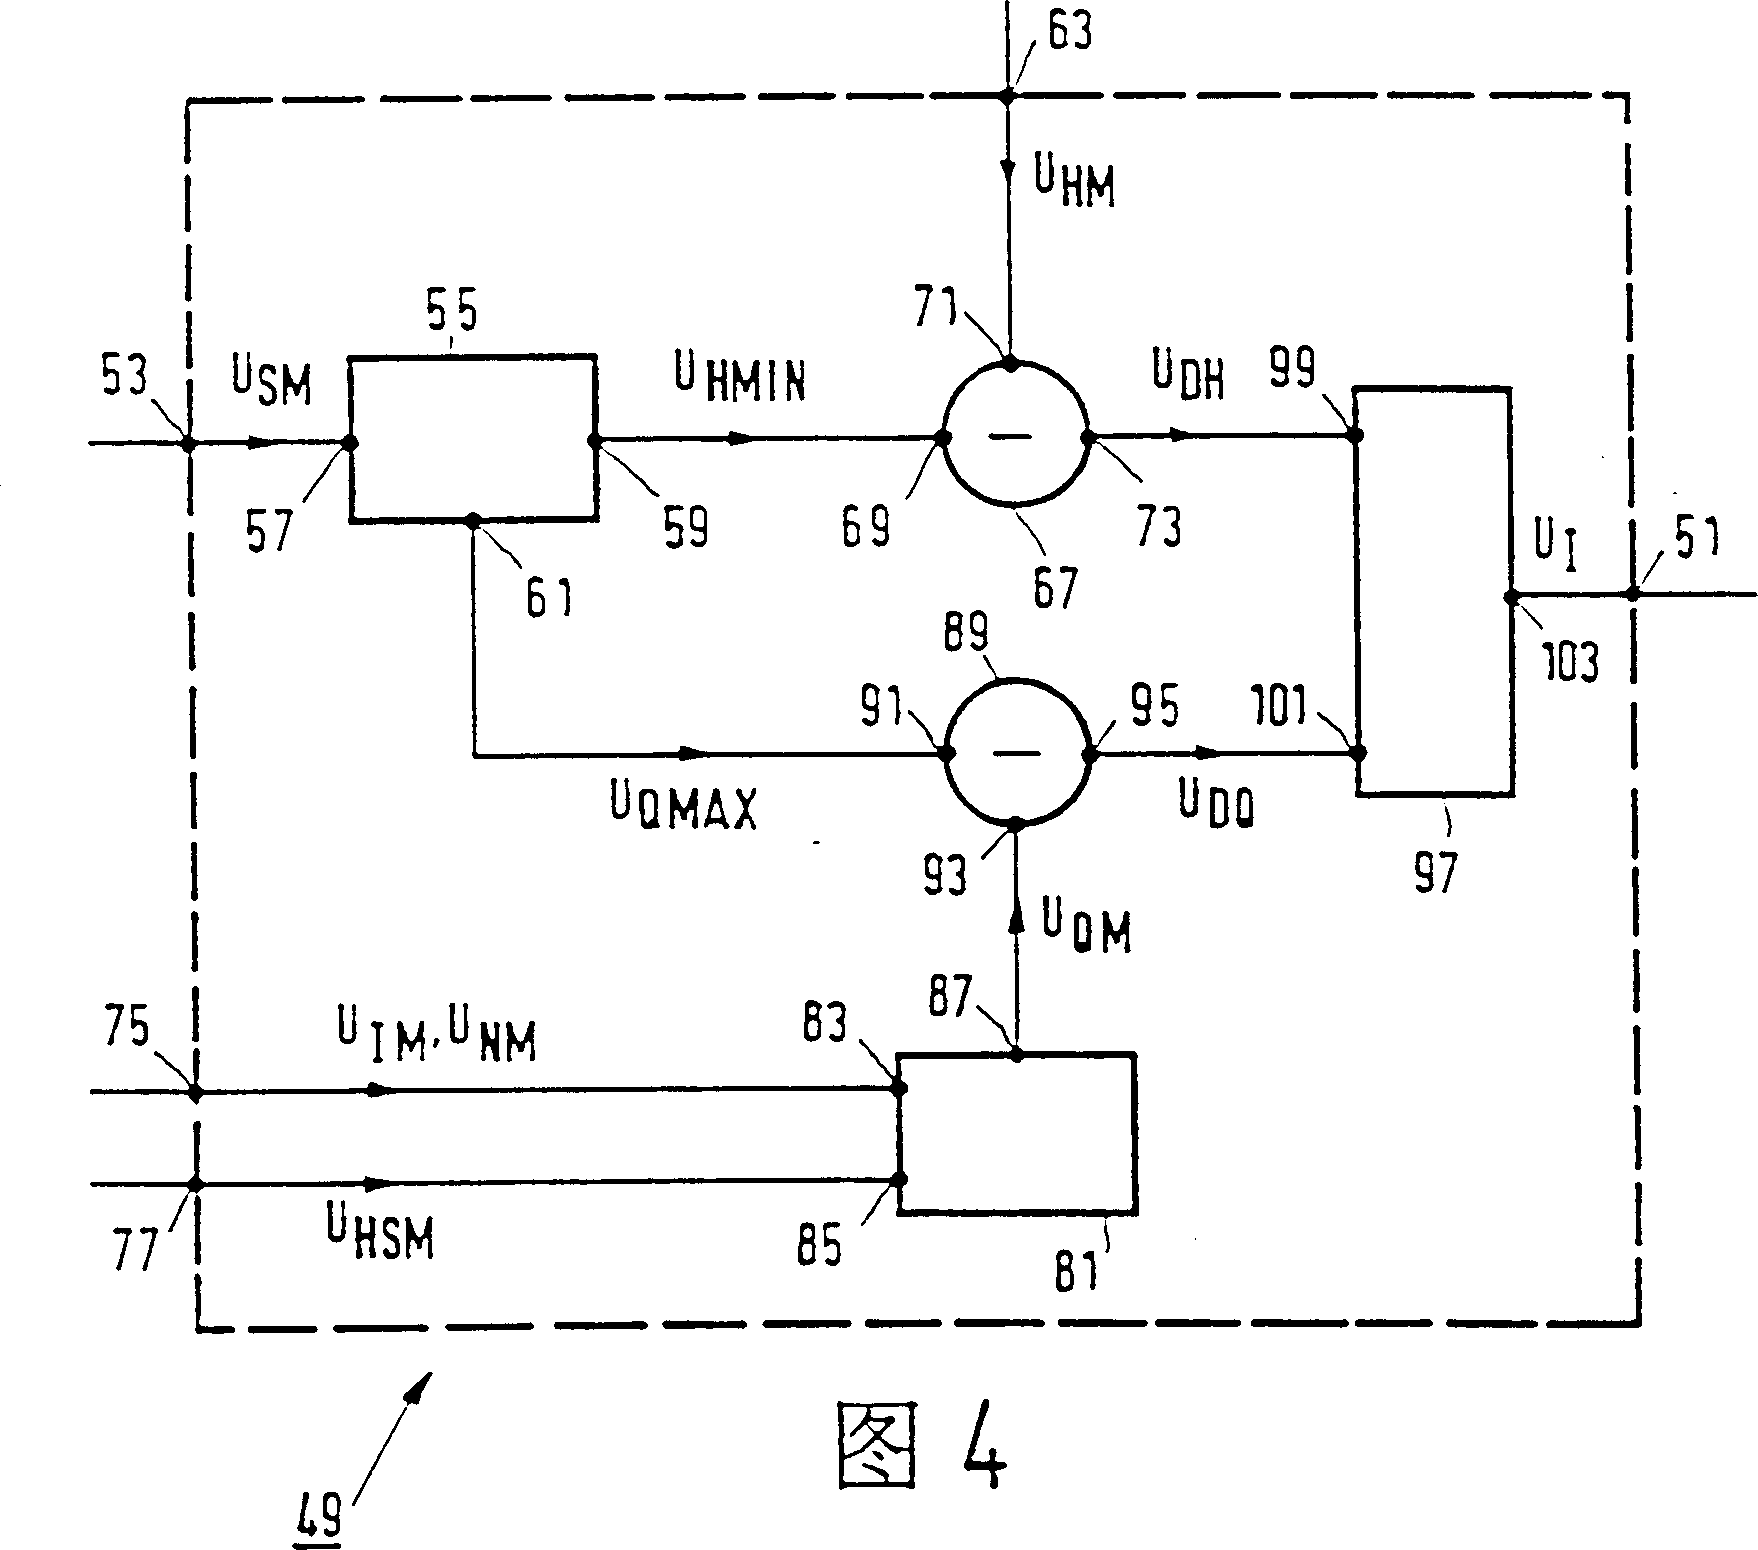 Vacuum cleaner with power control in dependence on mode of operation of electrical brush